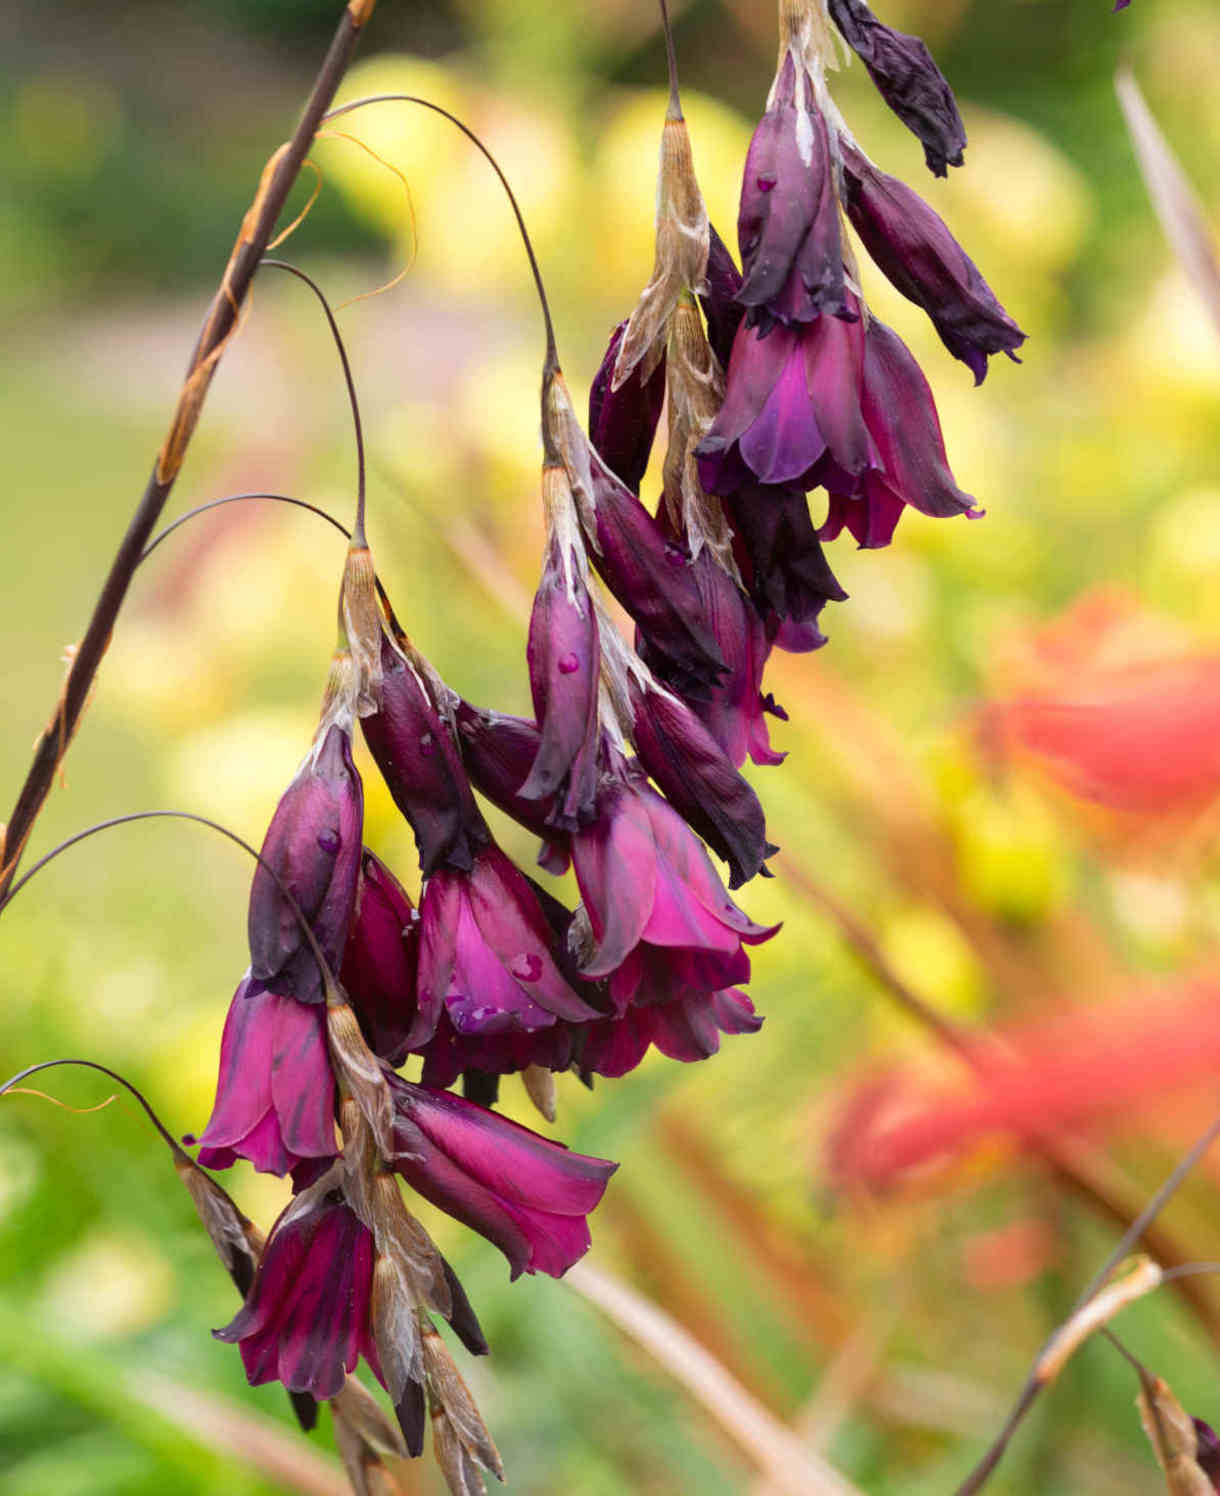 Dierama_Blackbird_-_1220x1496_Alamy_P79F6E_Online_use_only_5.5.23_extended_to_advert_use